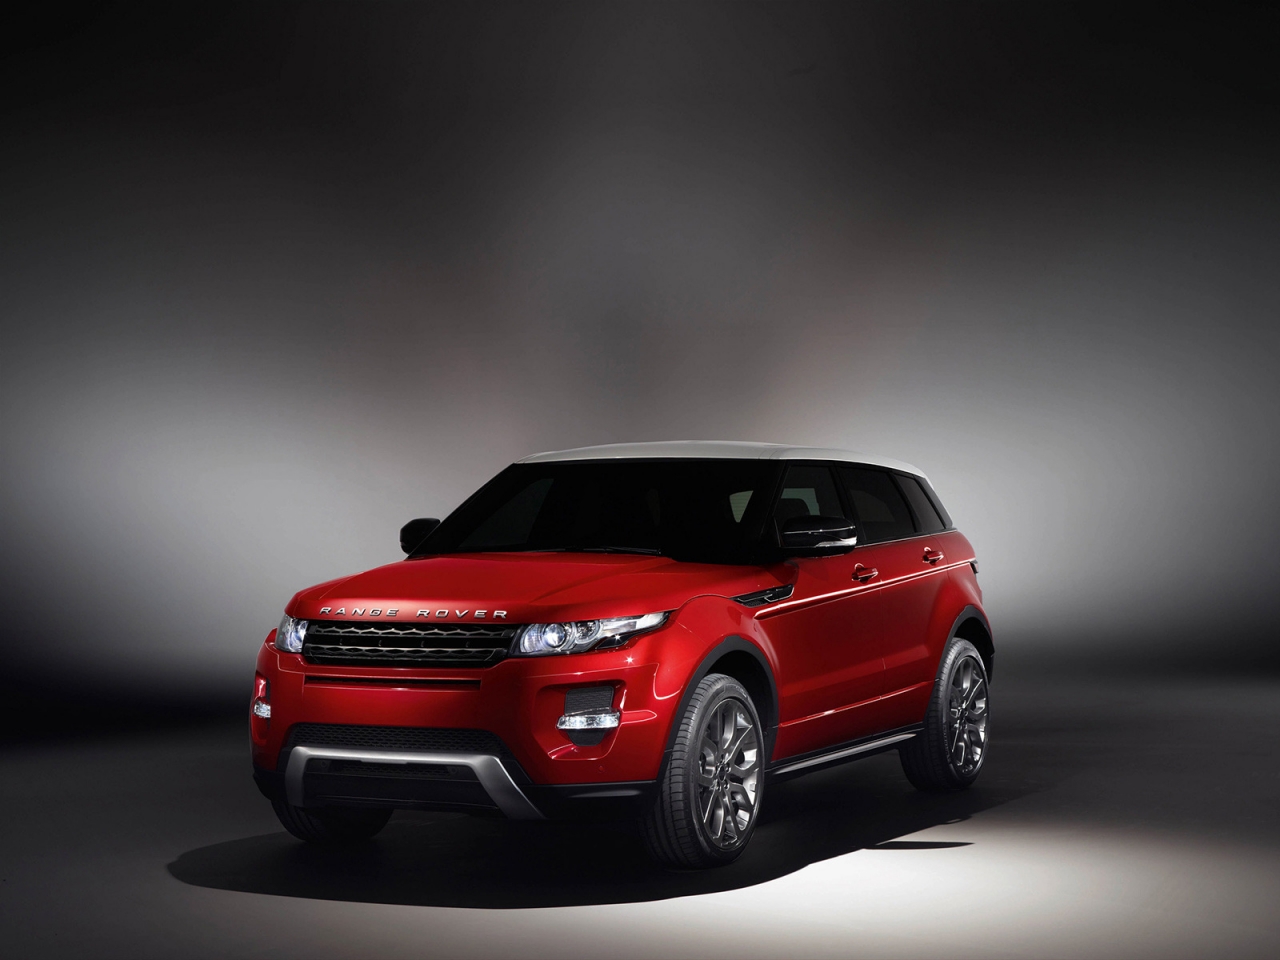 2012 Range Rover Evoque Red for 1280 x 960 resolution